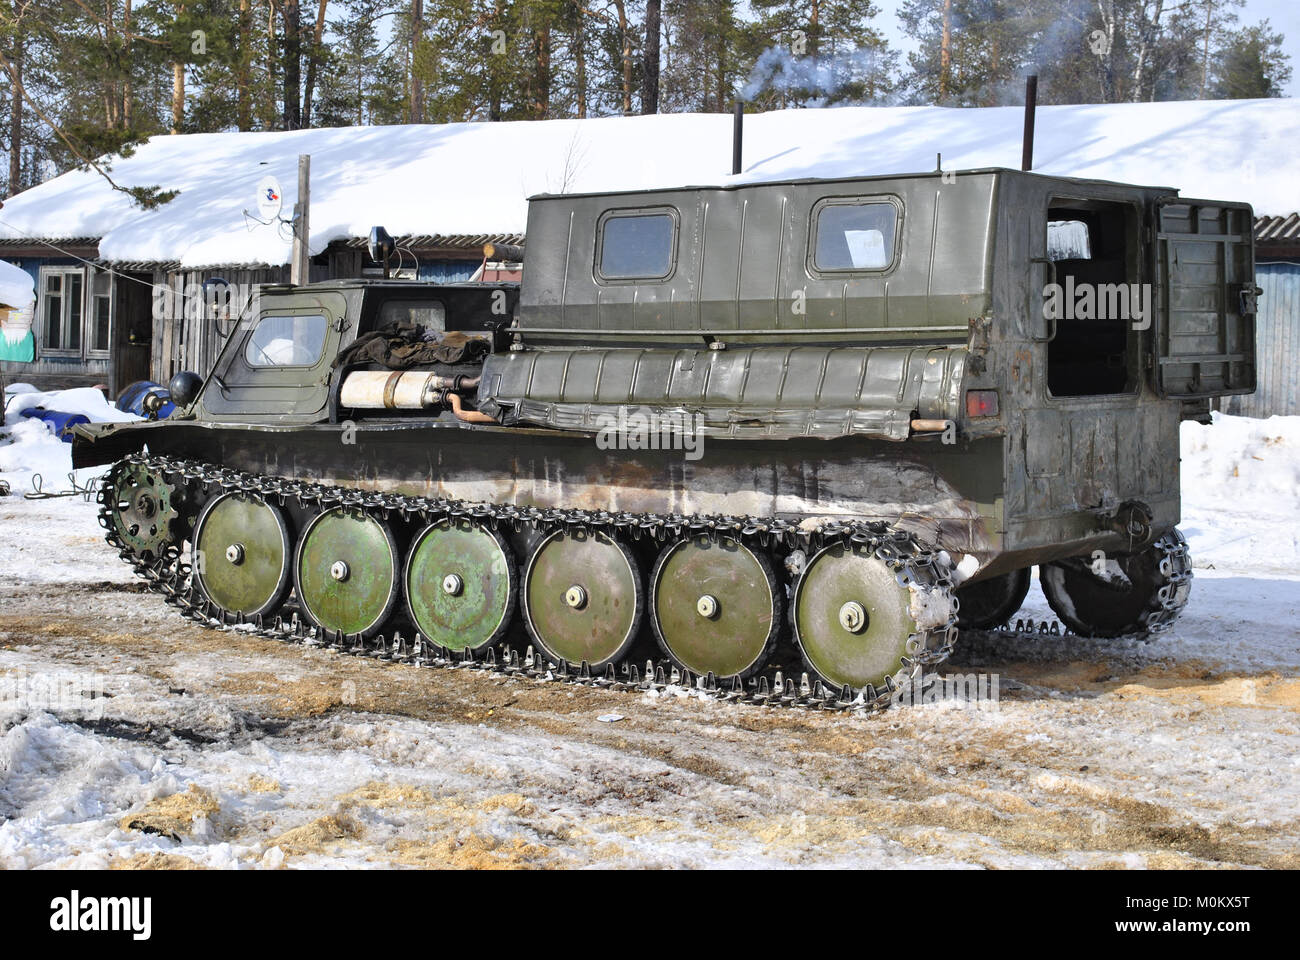 Crawler-vehicle. Cross-country vehicle for geological exploration. Russia, the Arctic Stock Photo